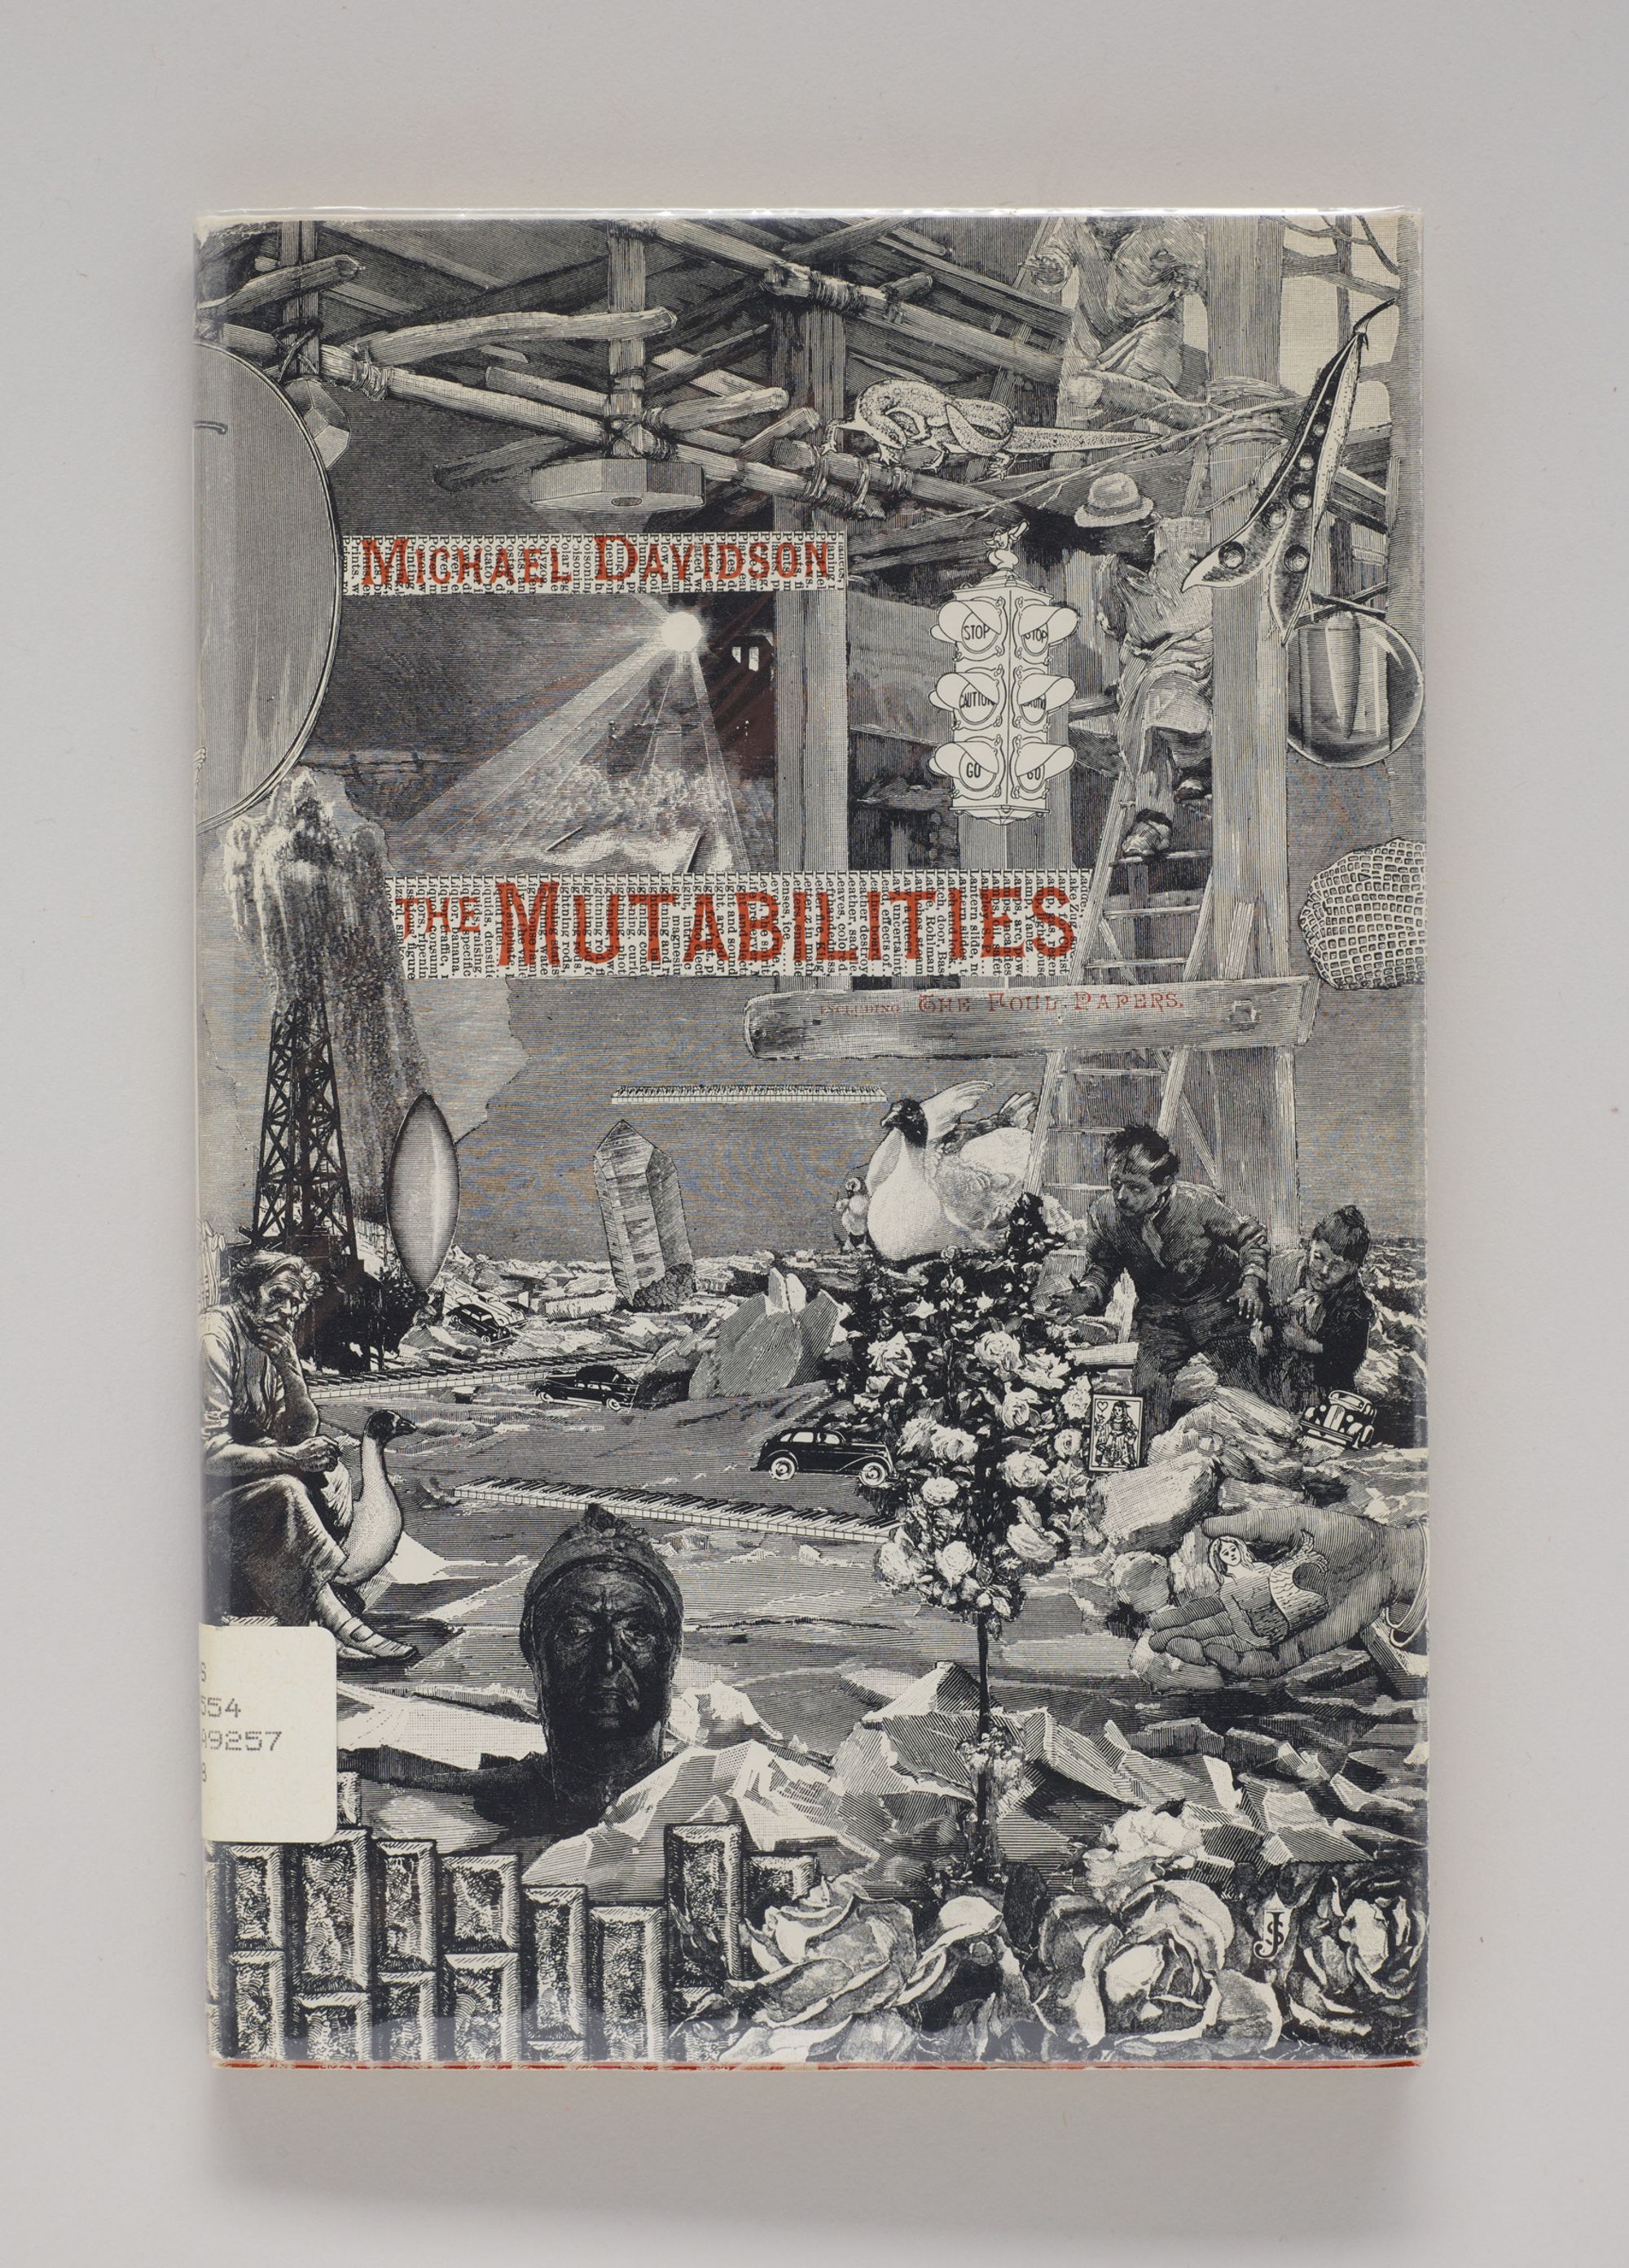 A black and white photographic collage with "The Mutabilities & the Foul Papers" written across it in soft red text.